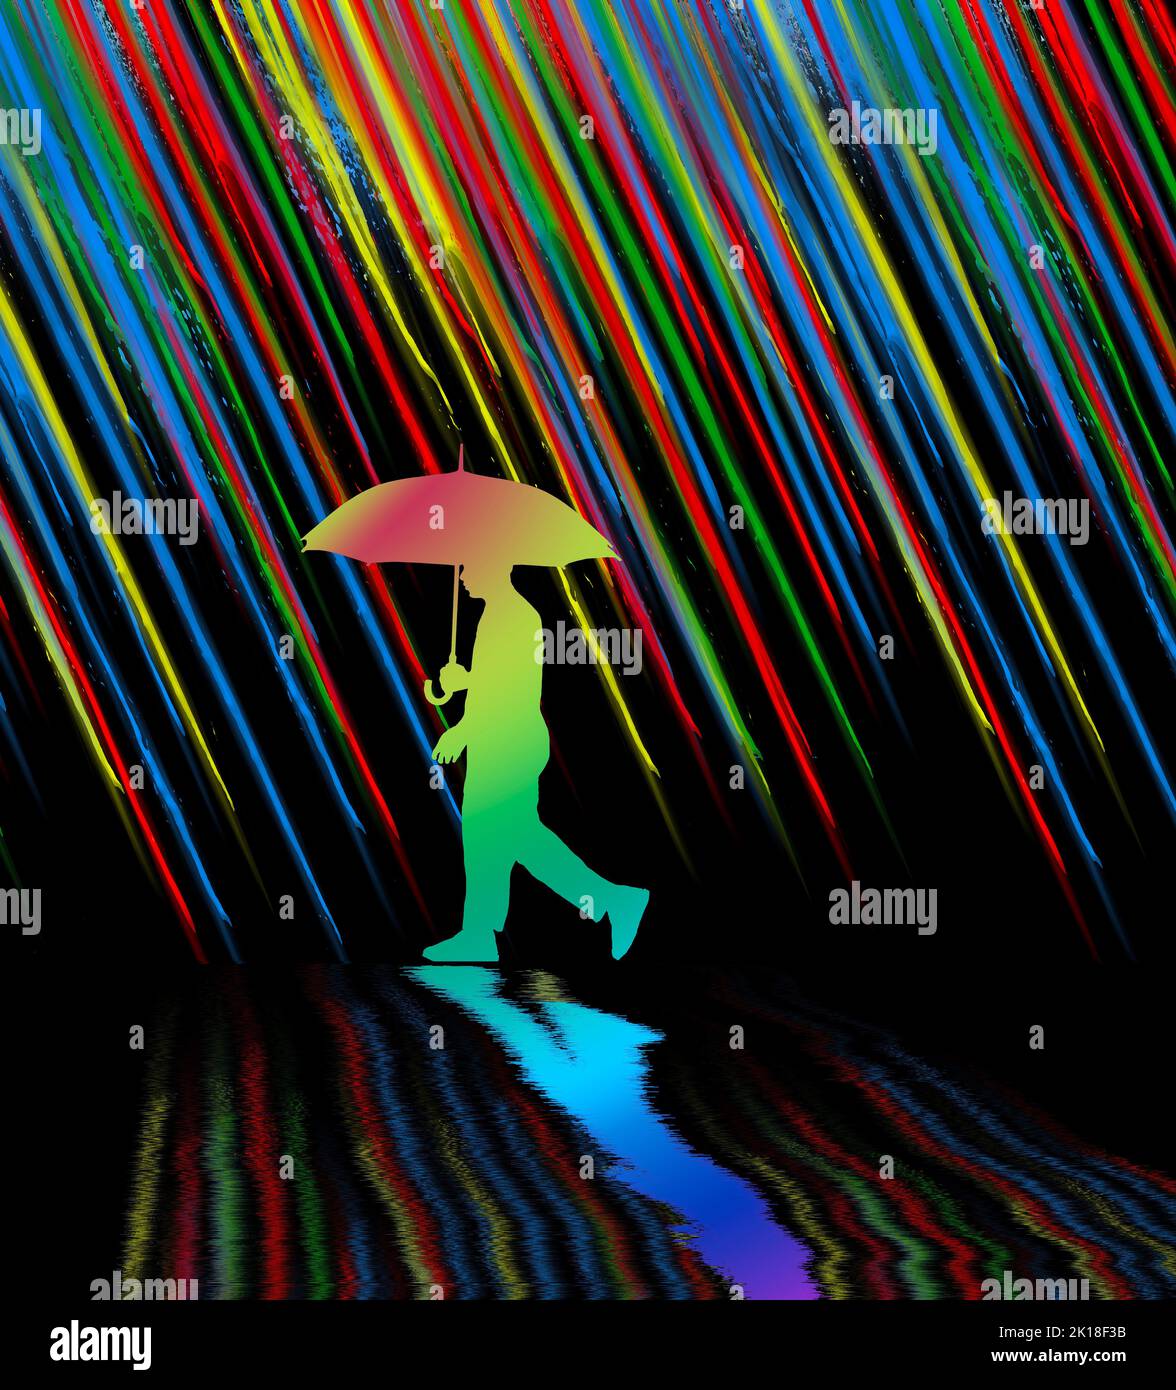 A man with an umbrella walks past angled lines of bright colors in a 3-d illustration. Stock Photo